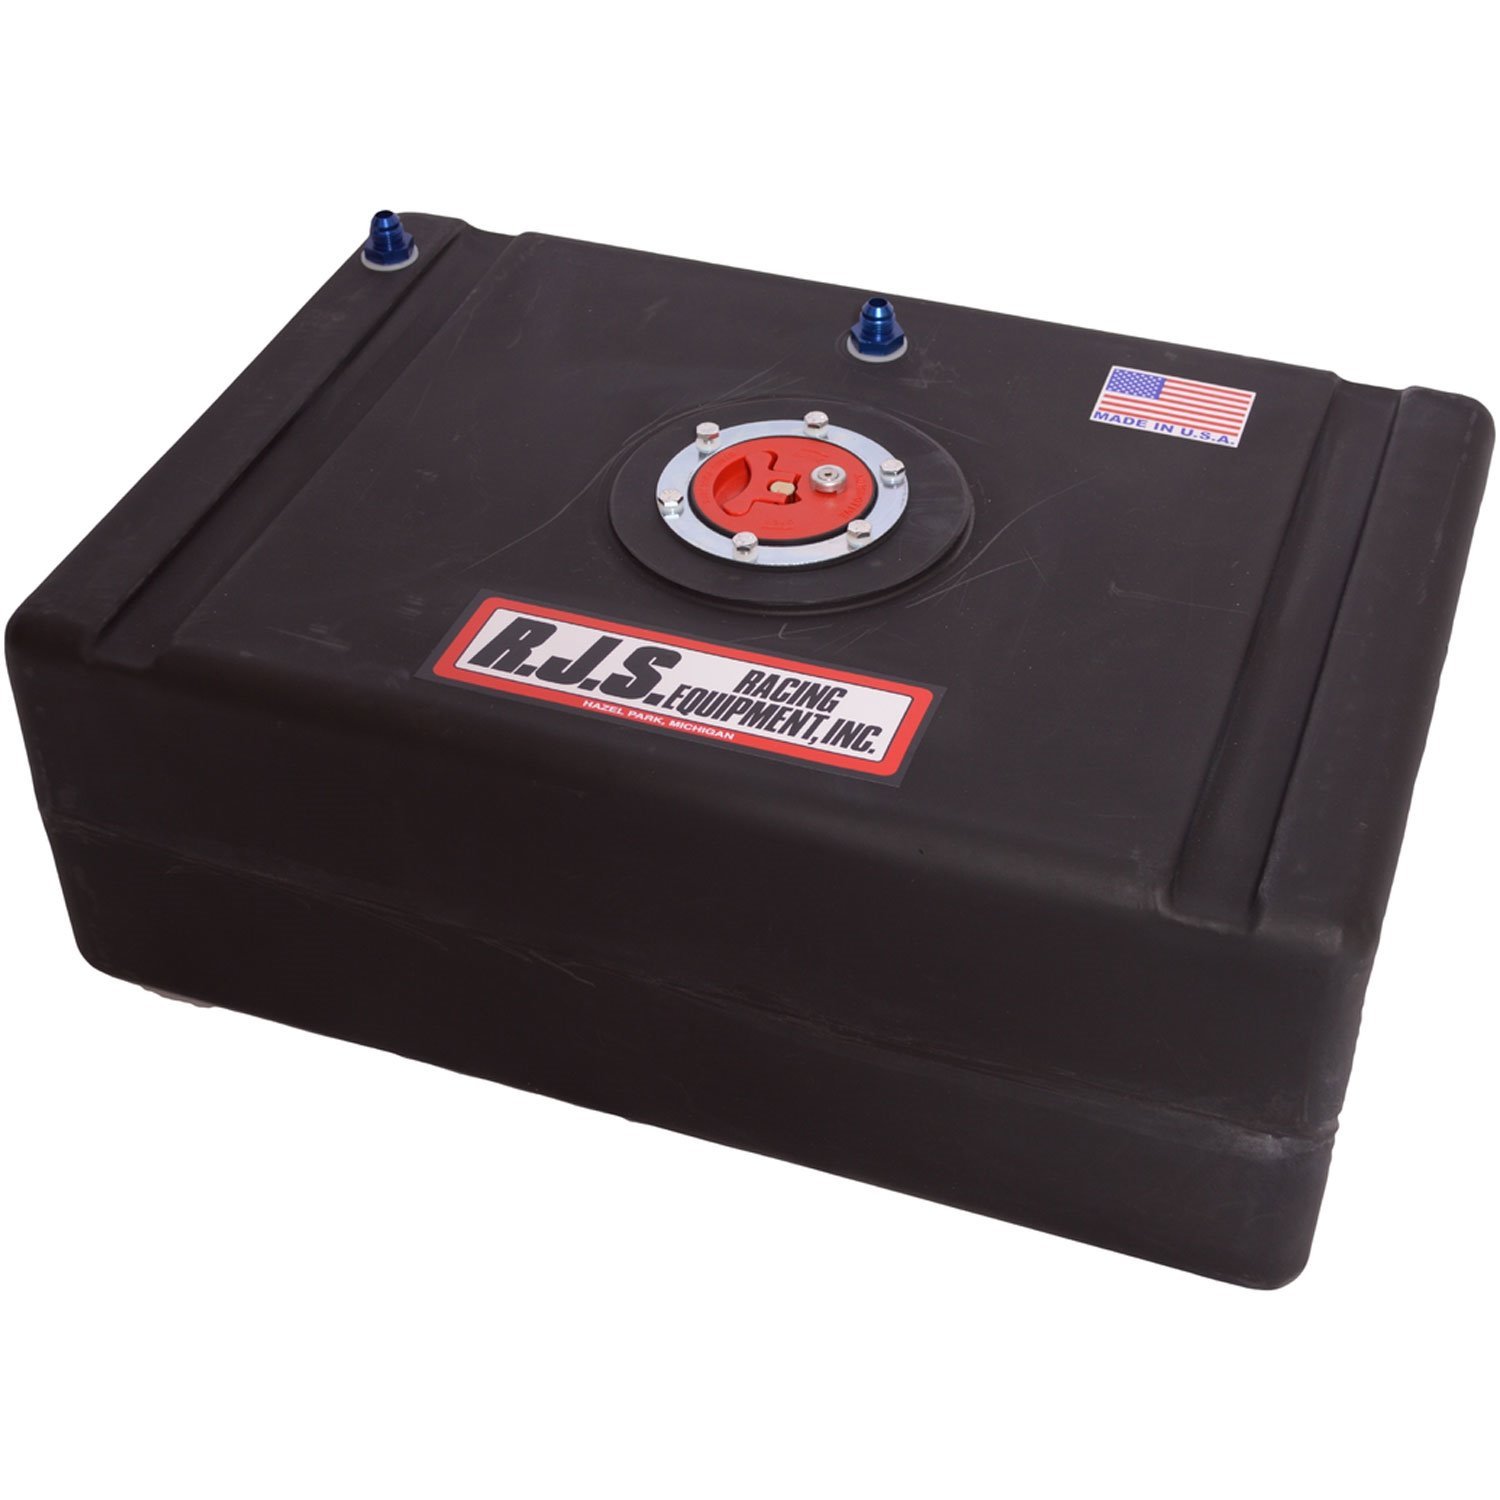 15 Gallon Economy Fuel Cell with Metal D-ring Filler Cap and Red Can